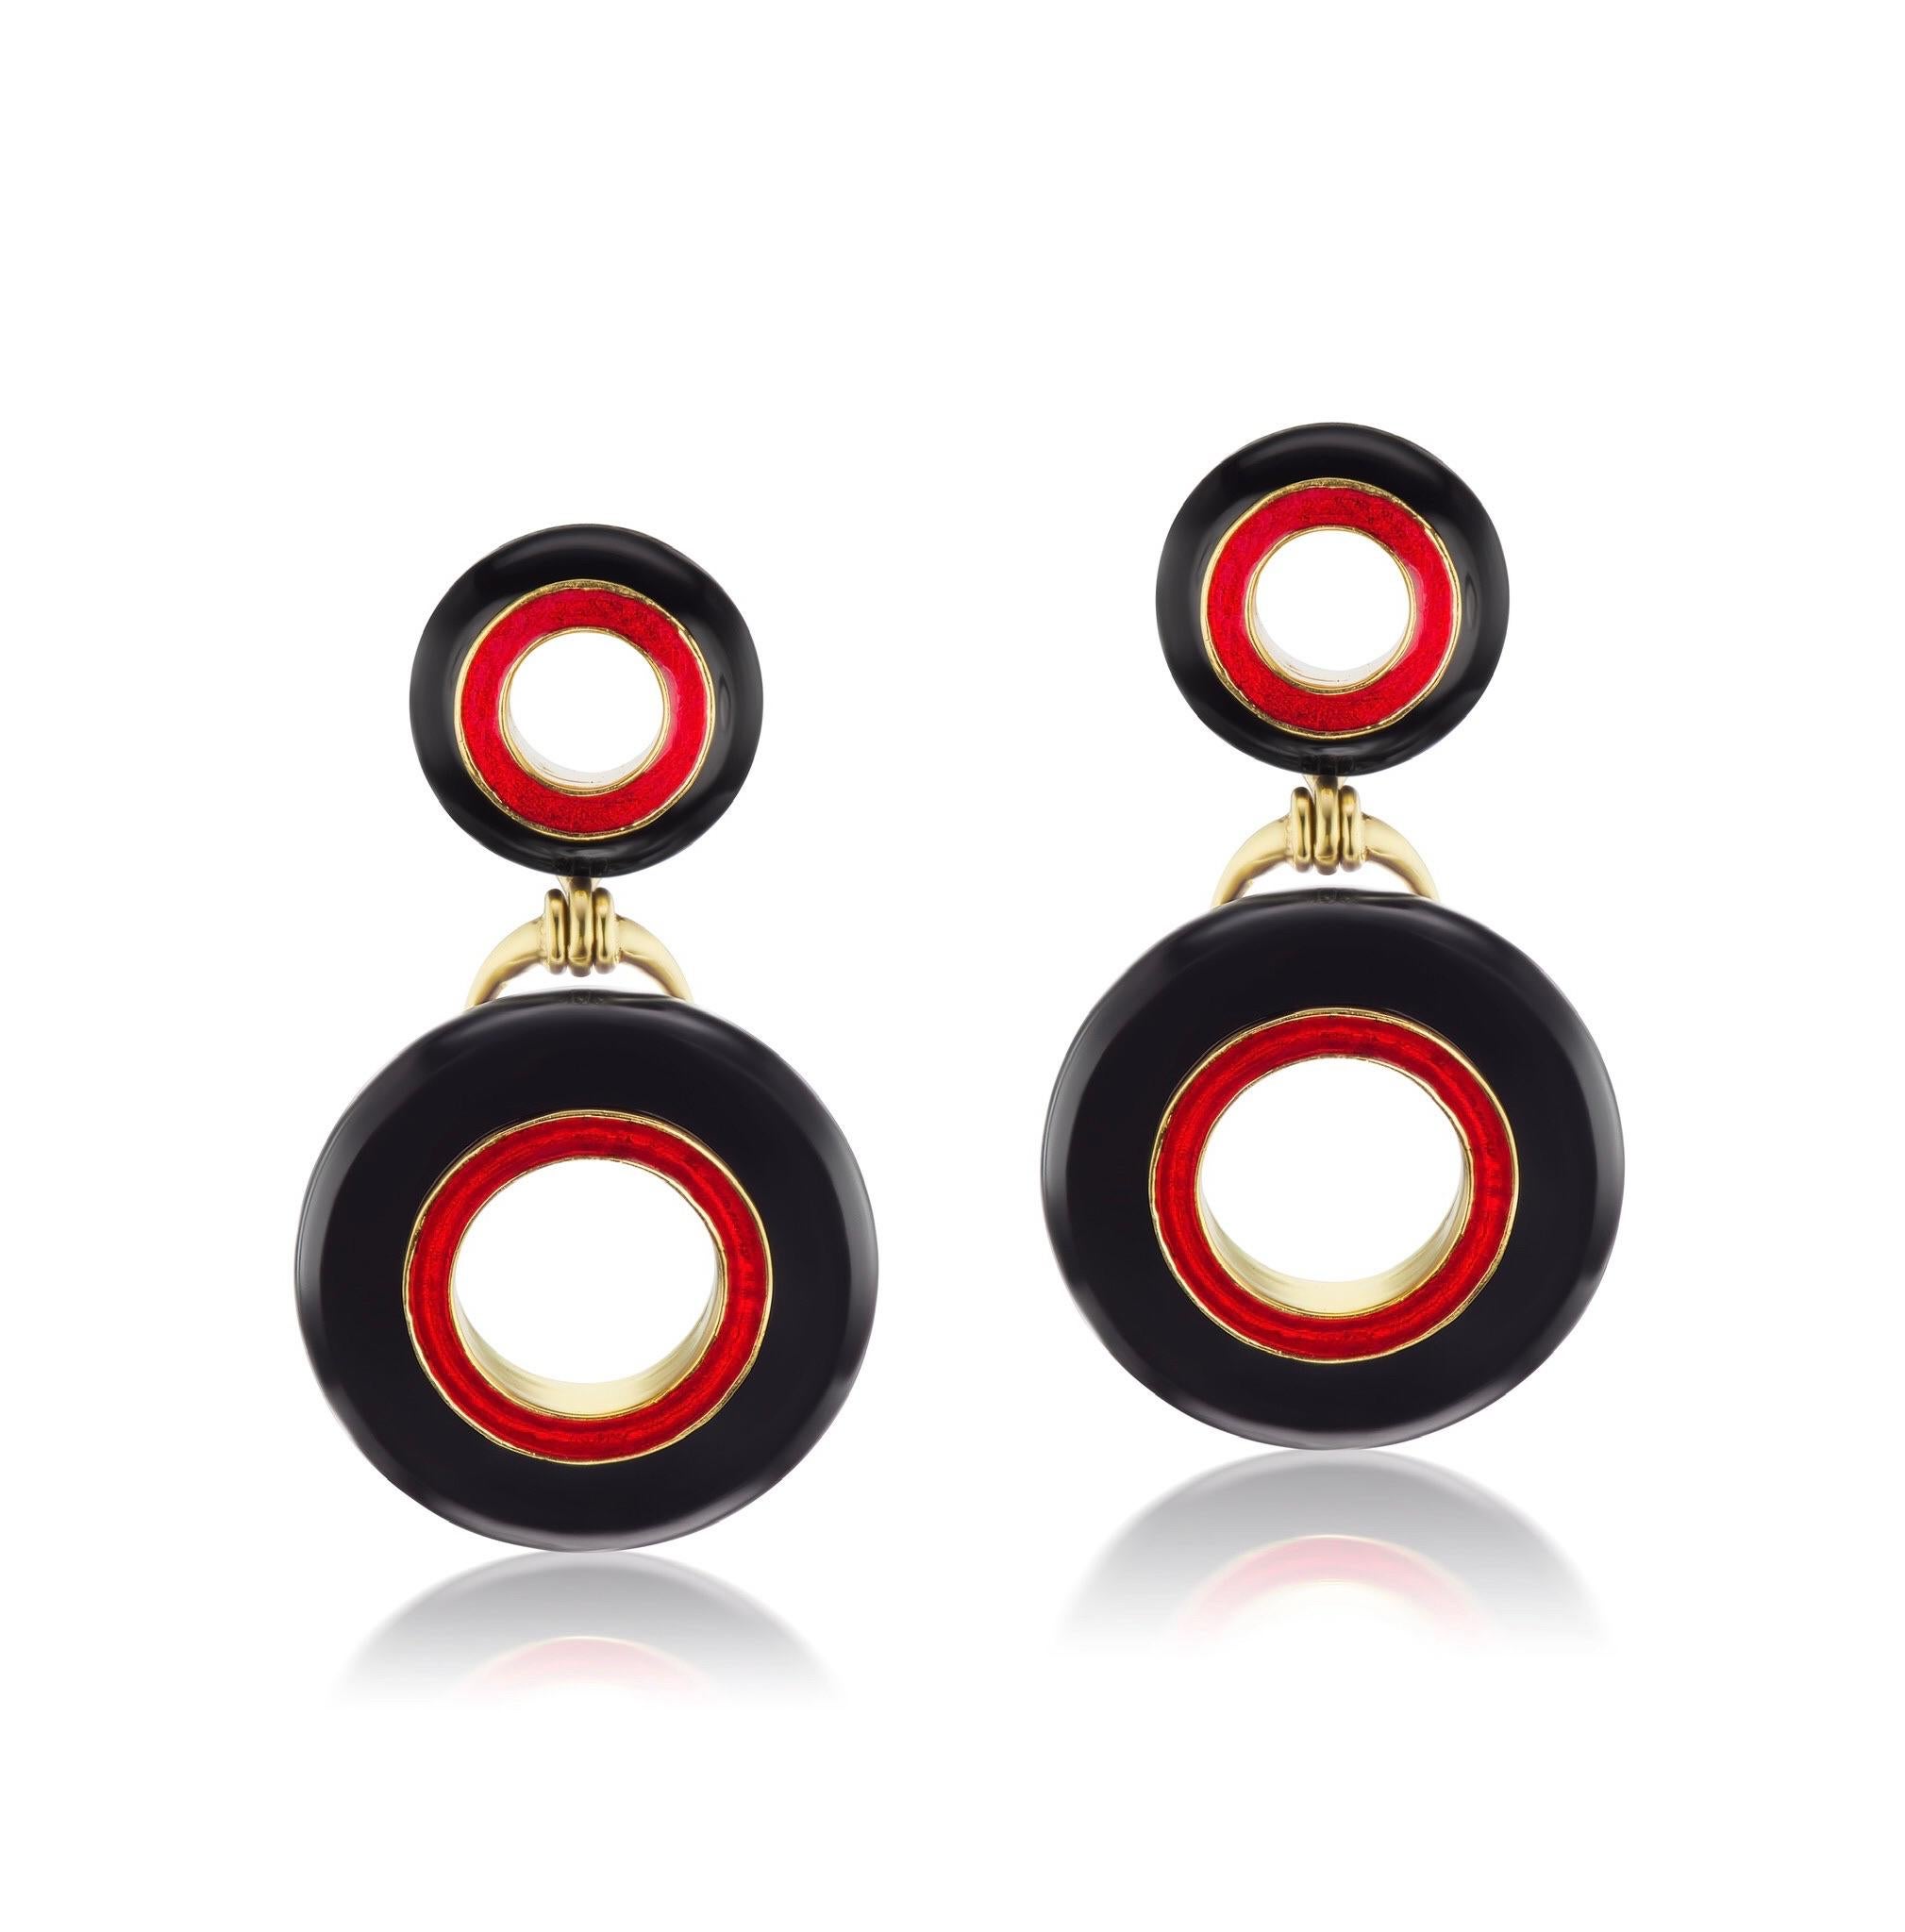 These Andrew Glassford earrings are part of his Donut Series. They are Black Jade and measure 12mm wide on top and 20mm wide on the bottom. They have a movement with a 